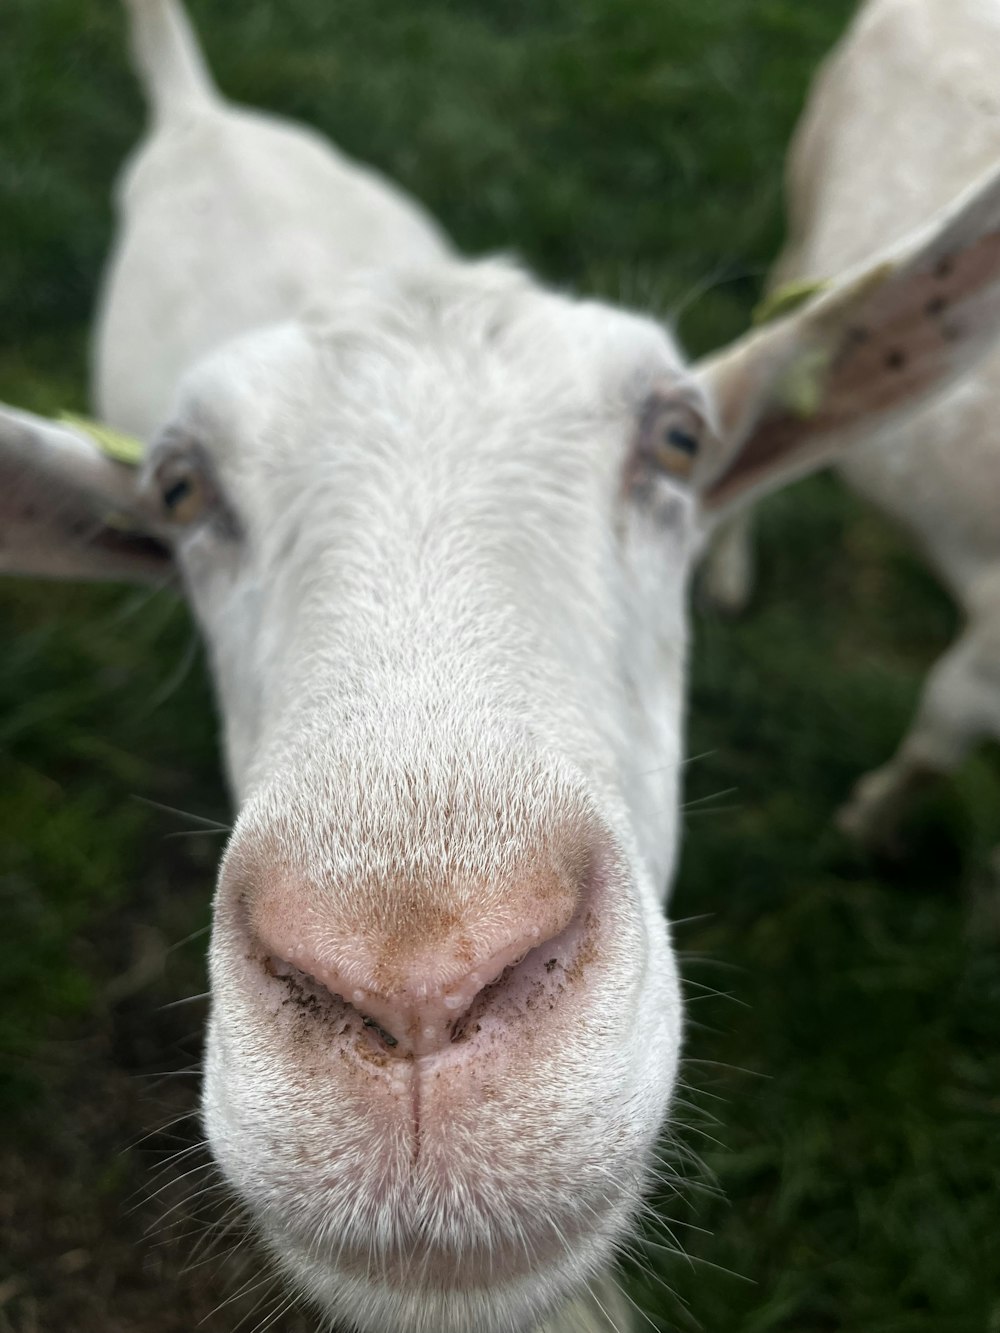 a close up of a goat's face with grass in the background